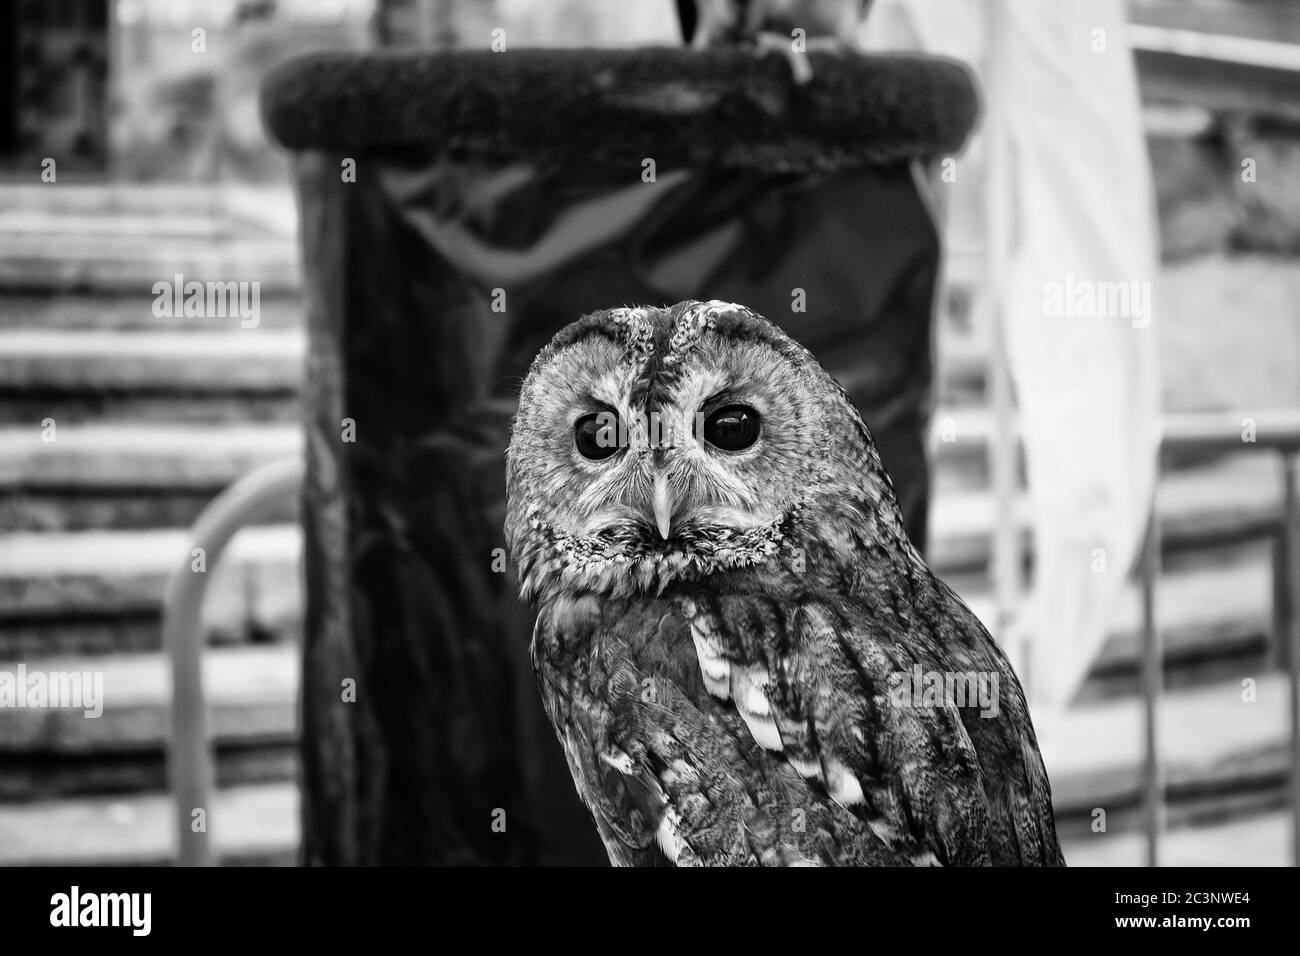 Wild trained owl, detail of large bird Stock Photo